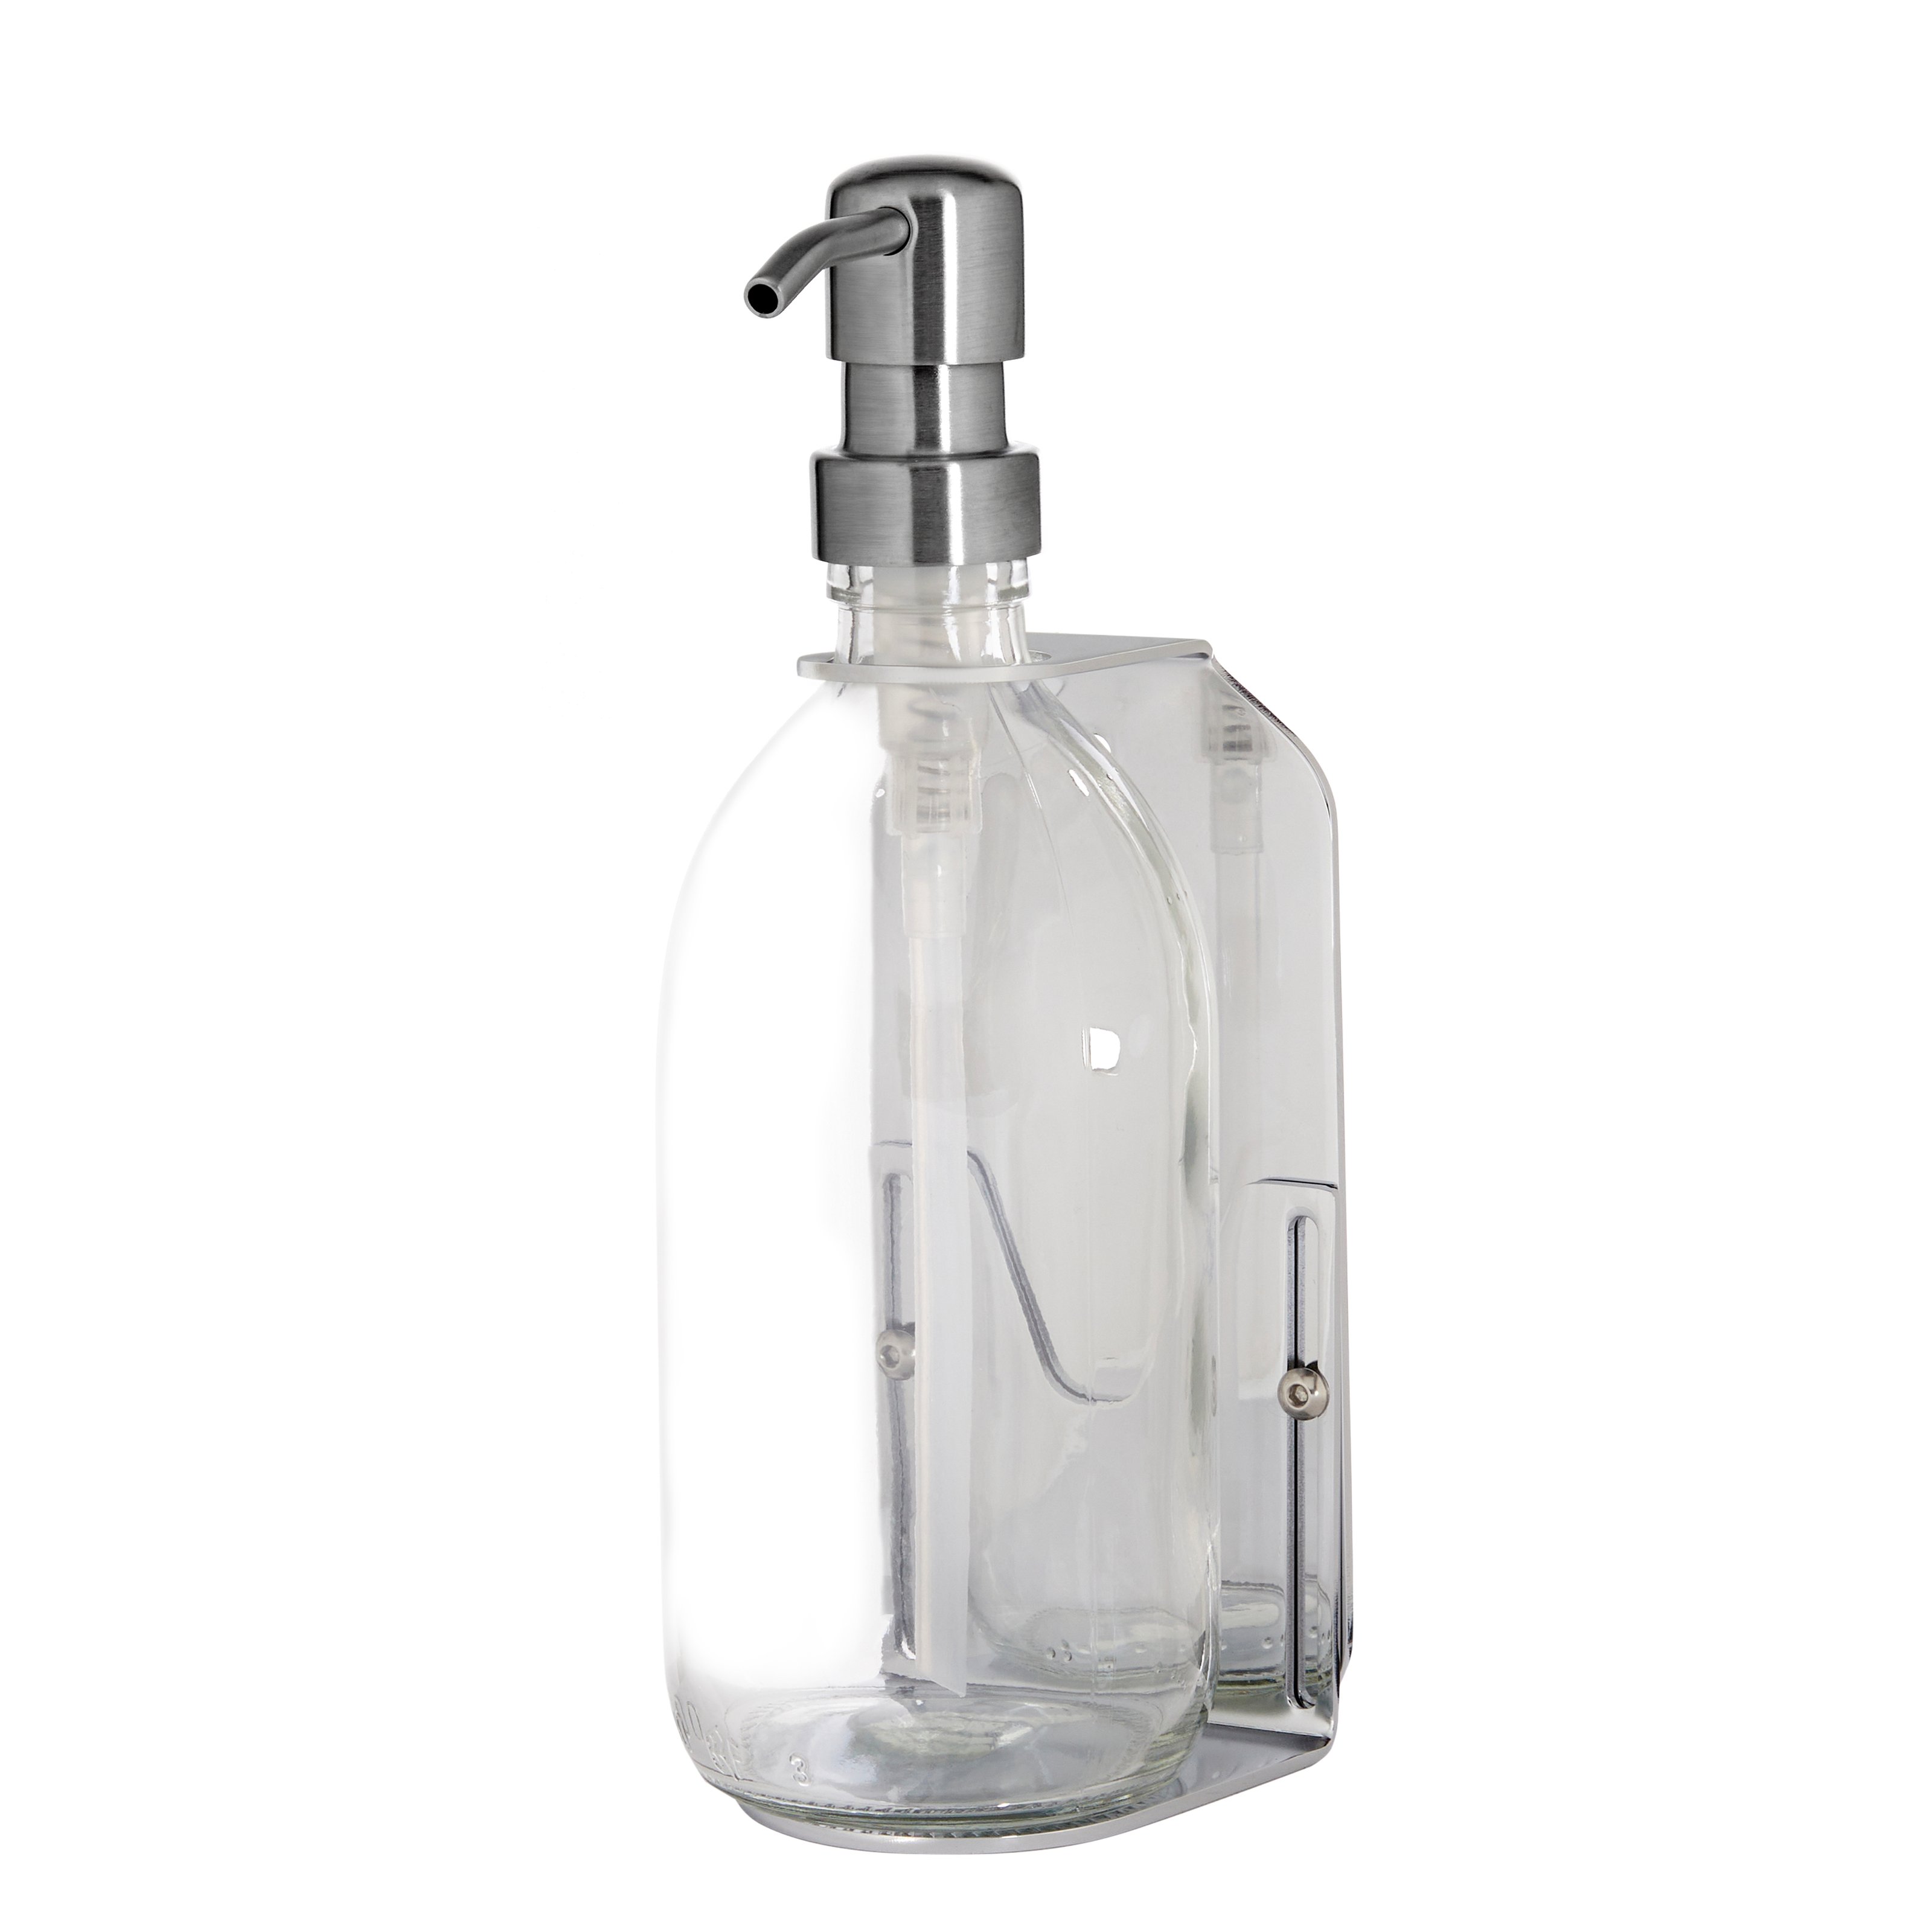 Single chrome wall mounted soap dispenser with clear dispenser and silver metal pump